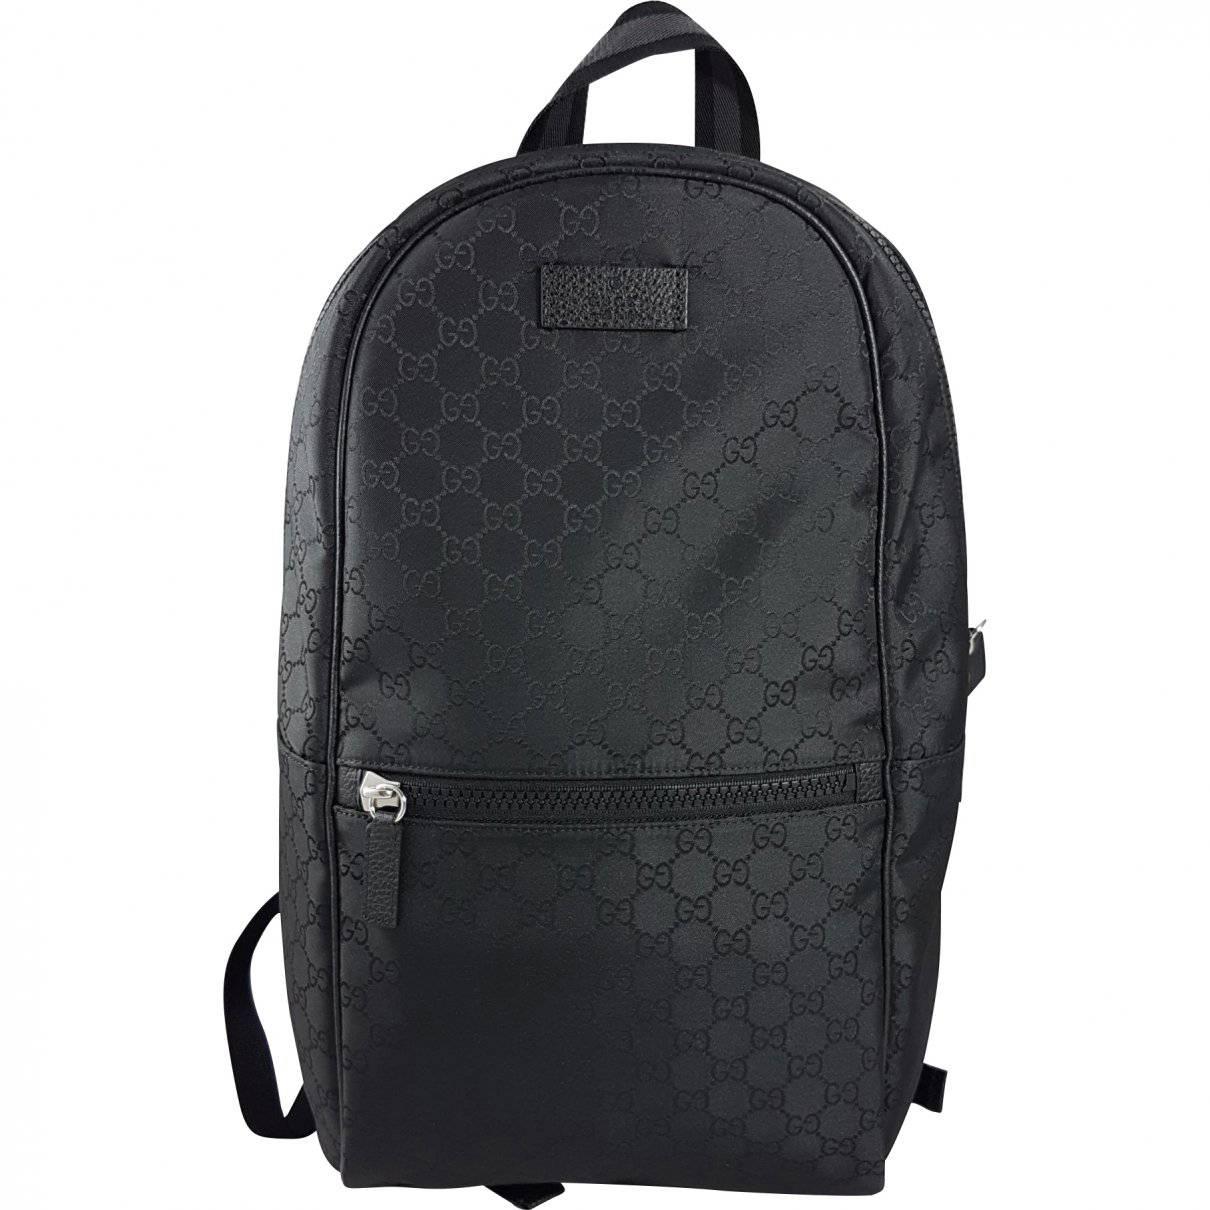 Gucci Black GG Guccissima Backpack Bag For Sale